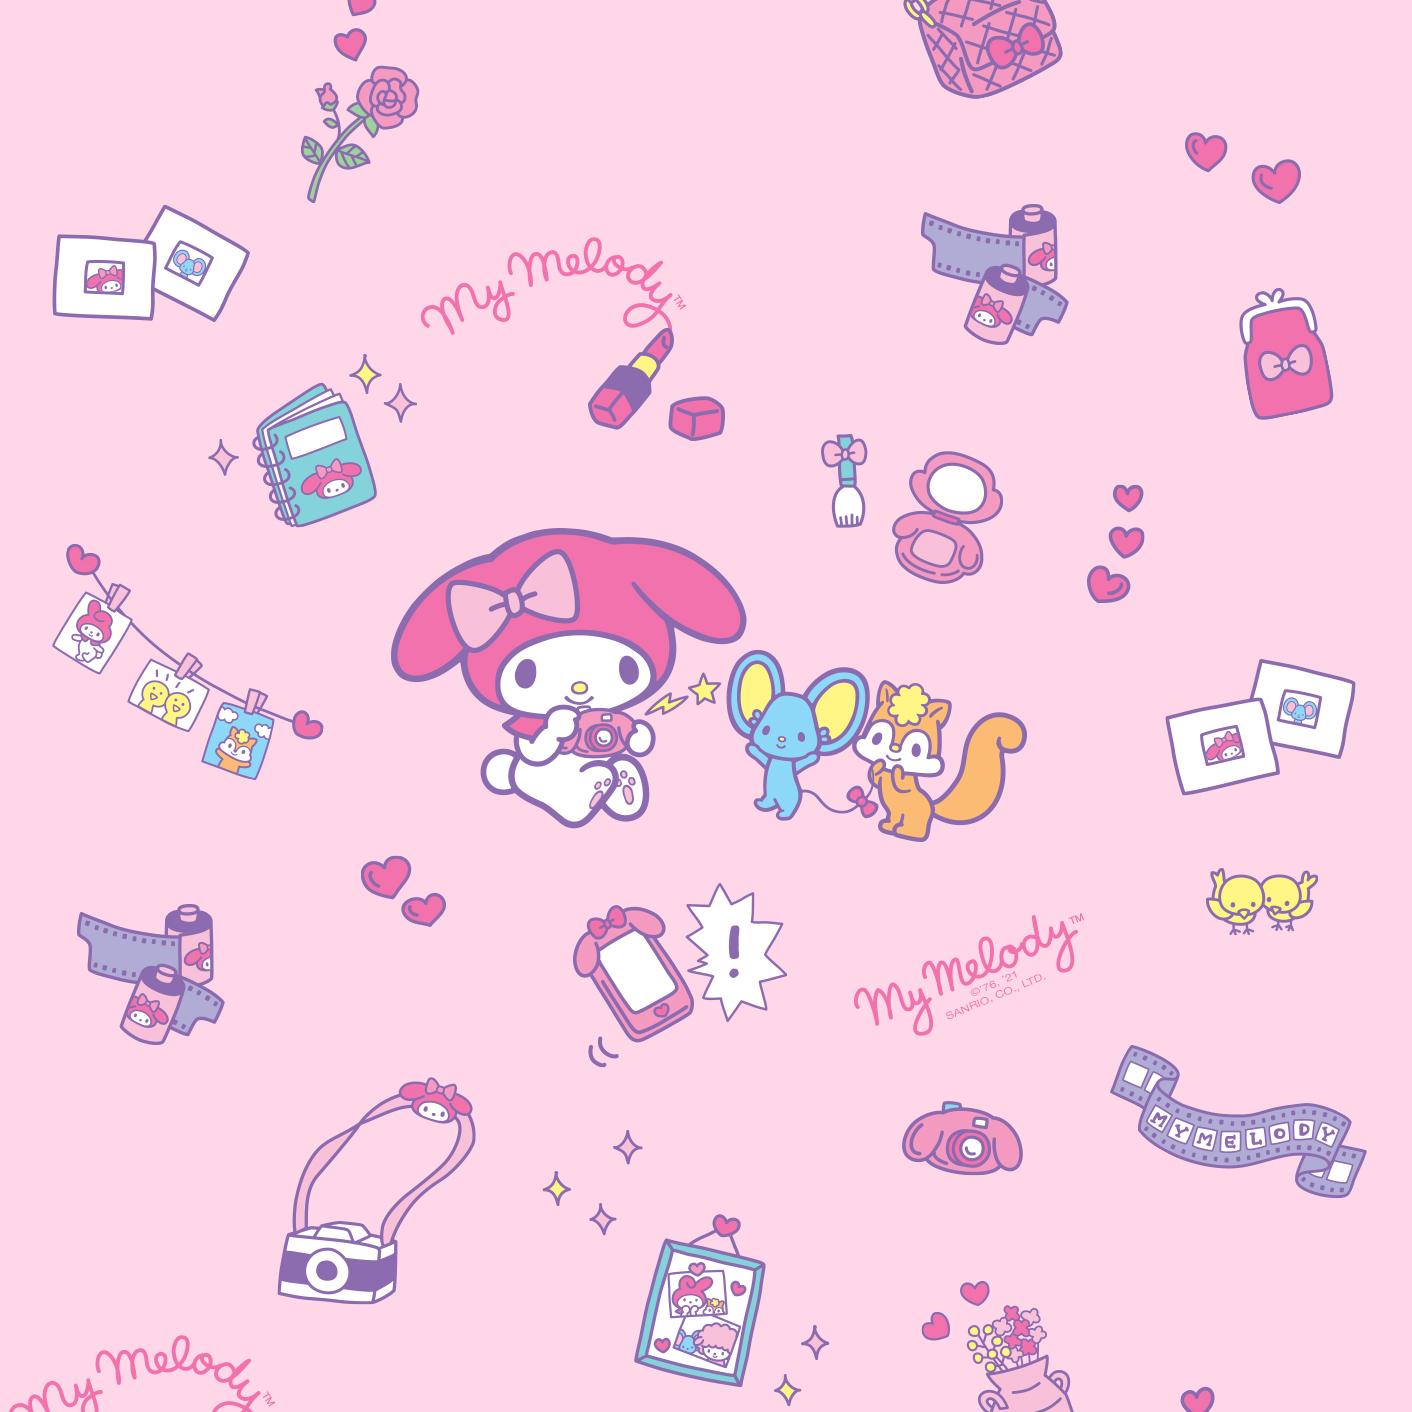 Sanrio year, new adorable background for your phone!